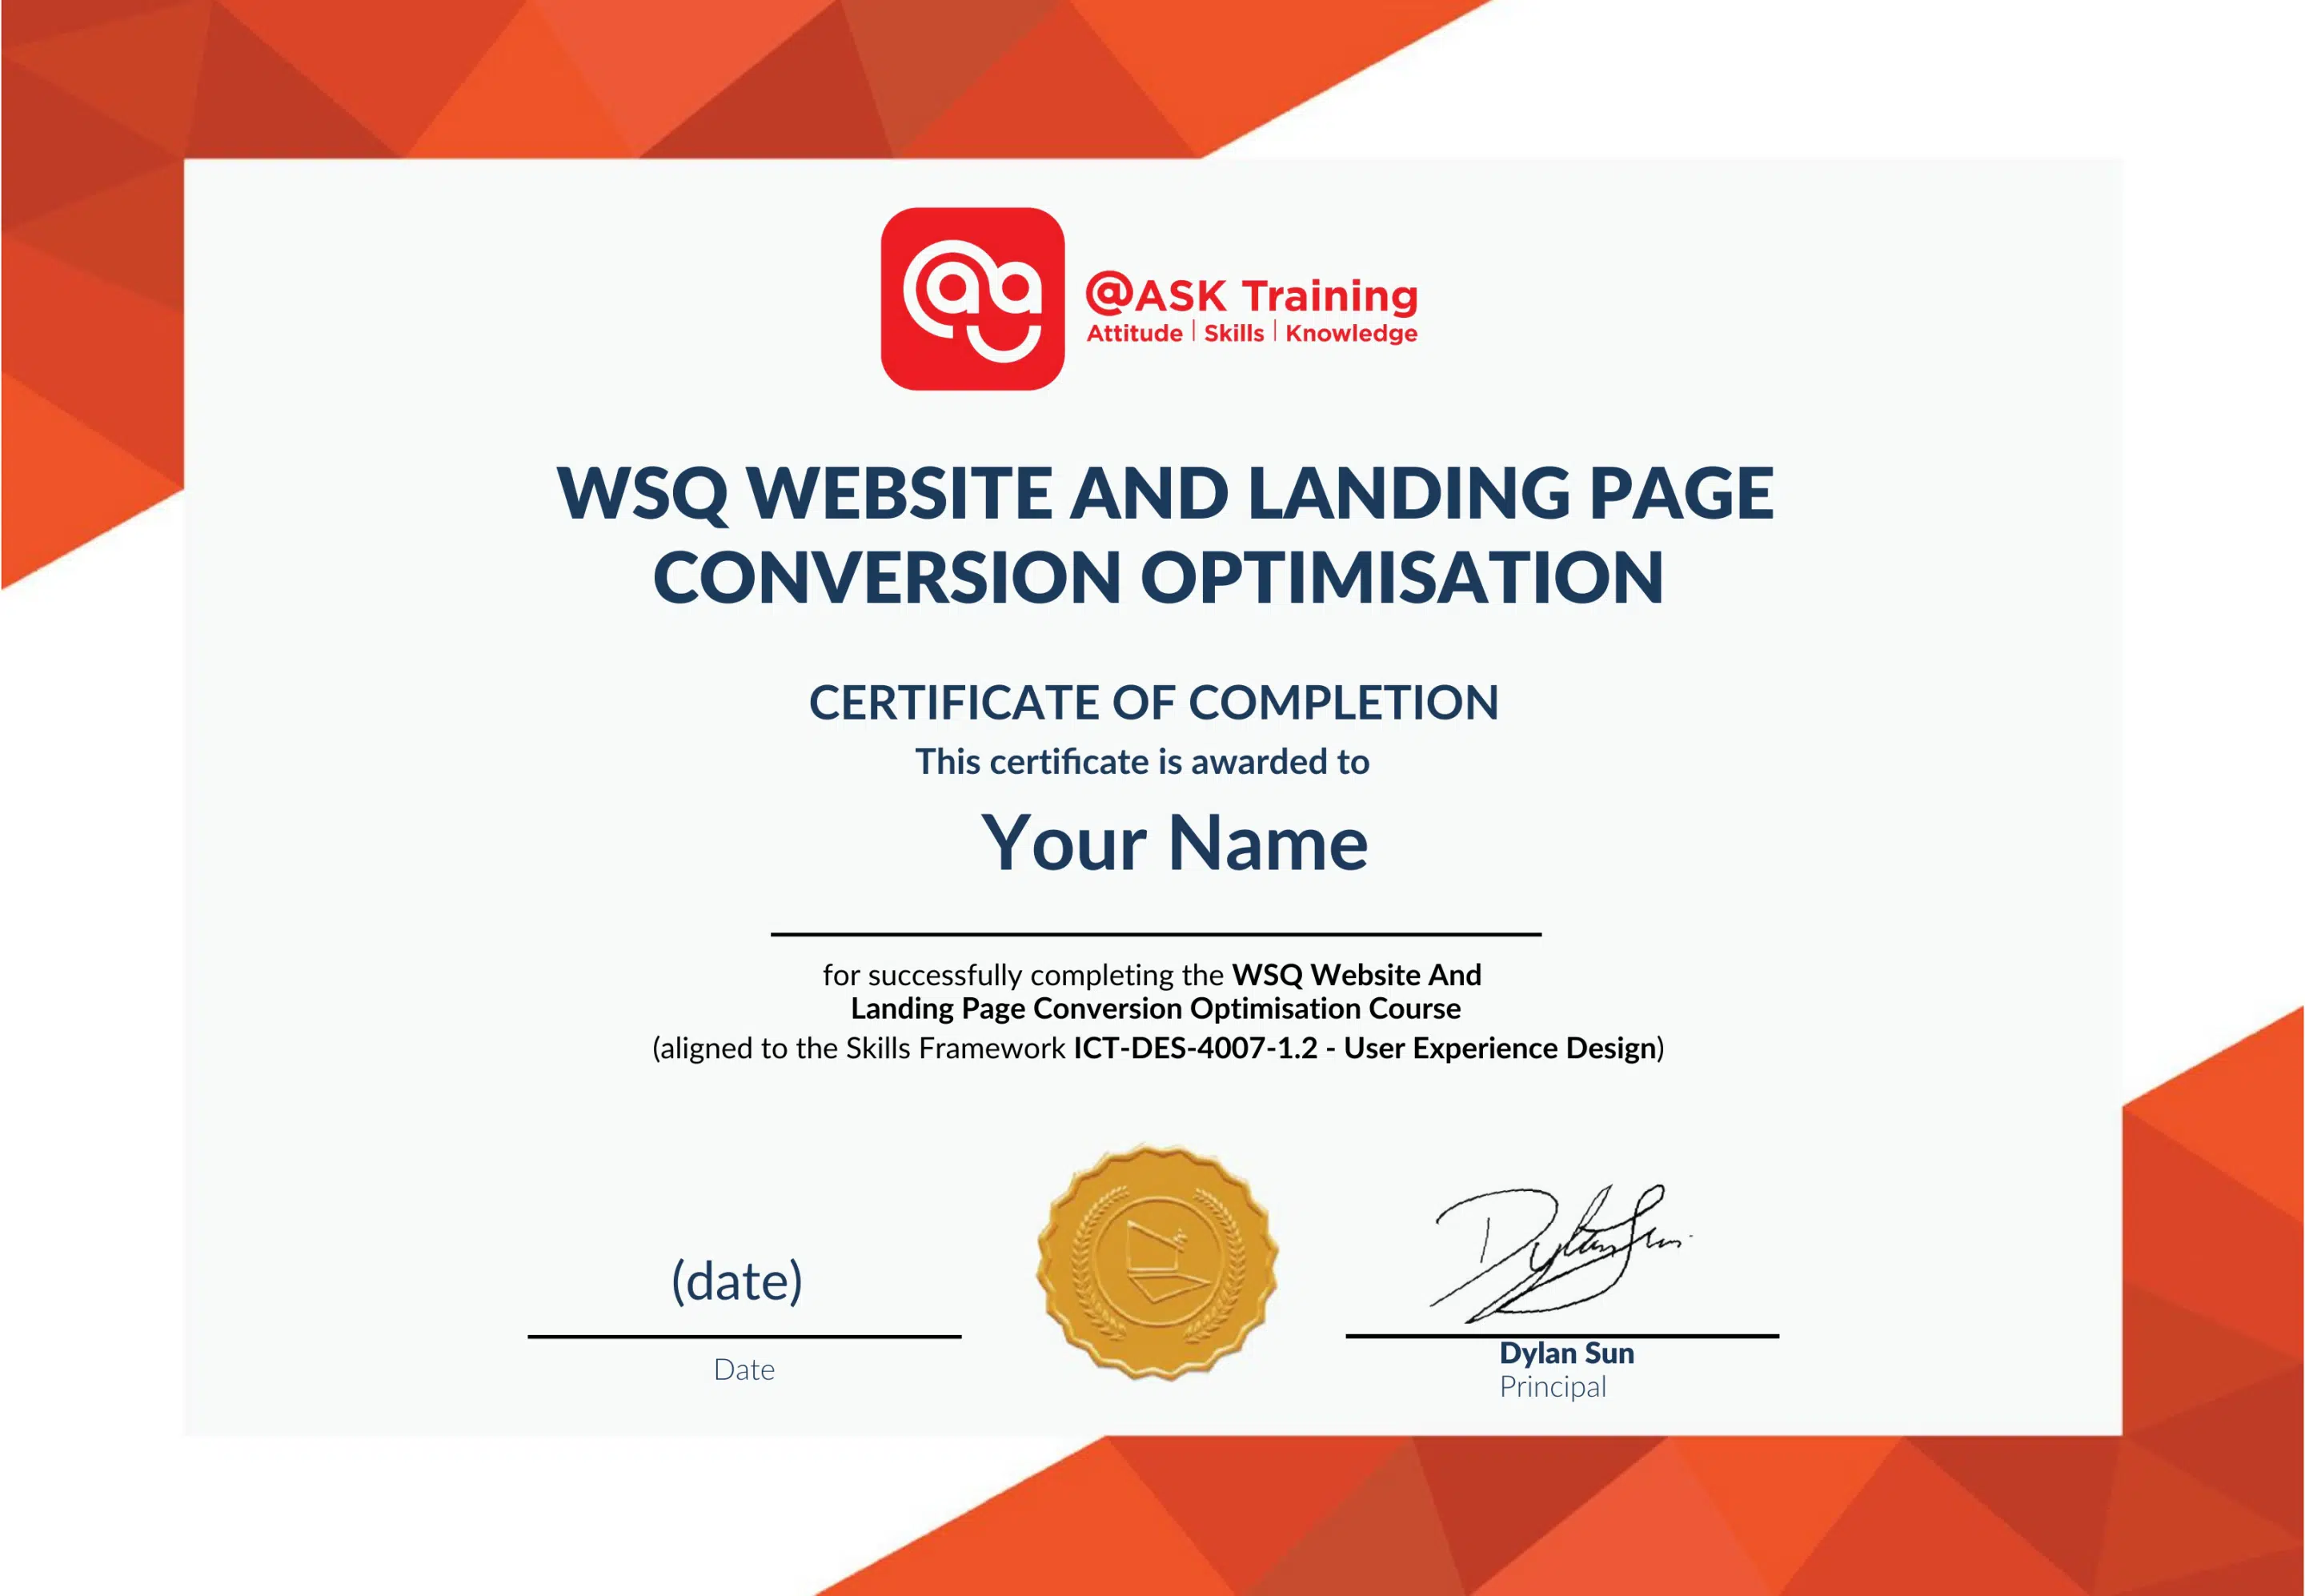 WSQ Website and Landing Page Conversion Optimisation Certificate Sample